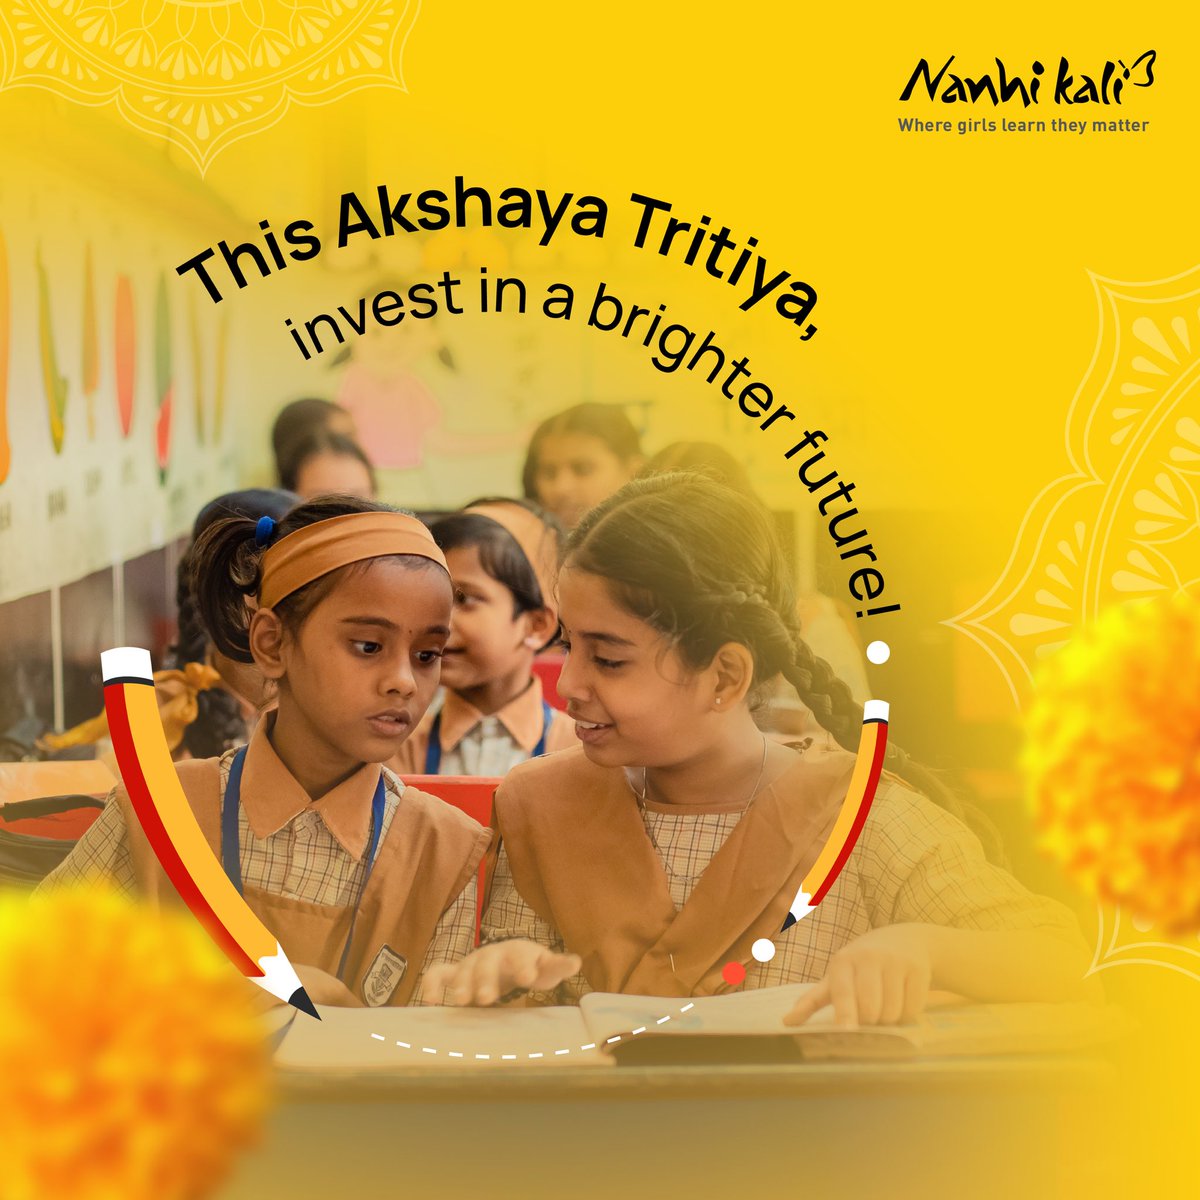 On this auspicious day of Akshaya Tritiya, let's extend boundless blessings to Nanhi Kalis. Your contribution today can transform lives and shape a future filled with endless opportunities. To donate, visit nanhikali.org. #NanhiKali #WhereGirlsLearnTheyMatter